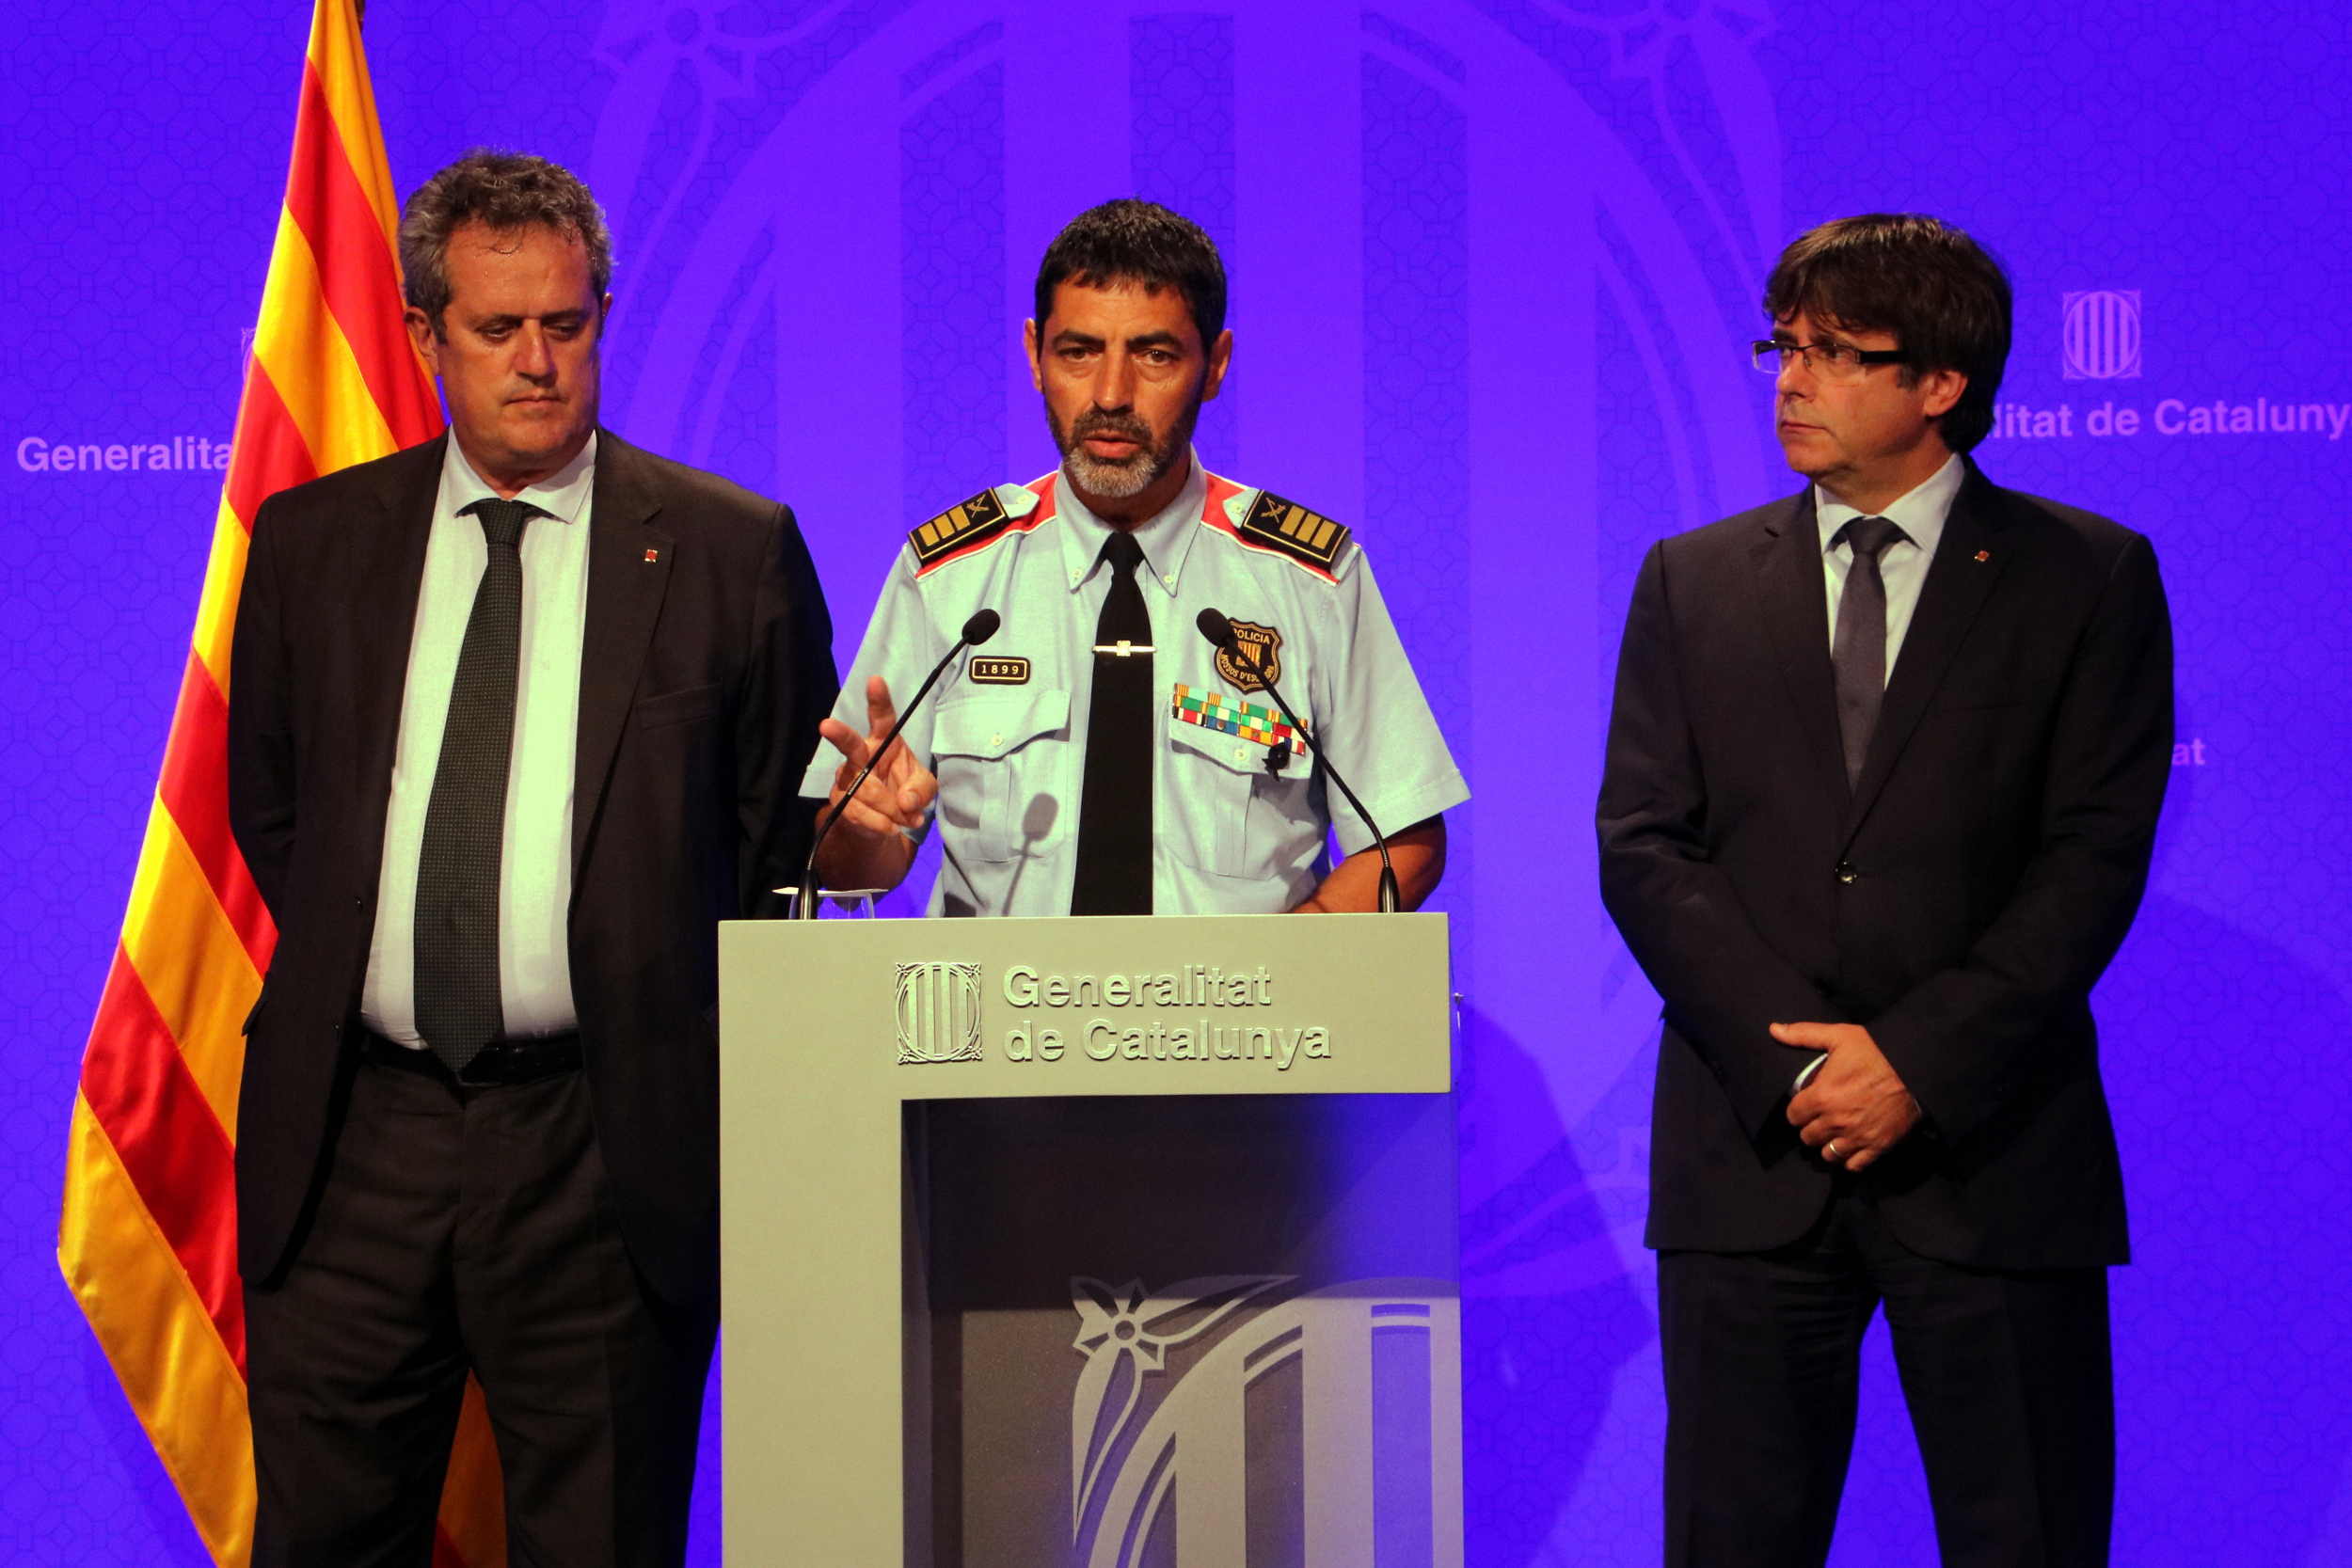 Former Catalan police chief Josep Lluís Trapero (center), former interior minister Joaquim Forn (left), and former Catalan president Carles Puigdemont (right) (by Pere Francesch)